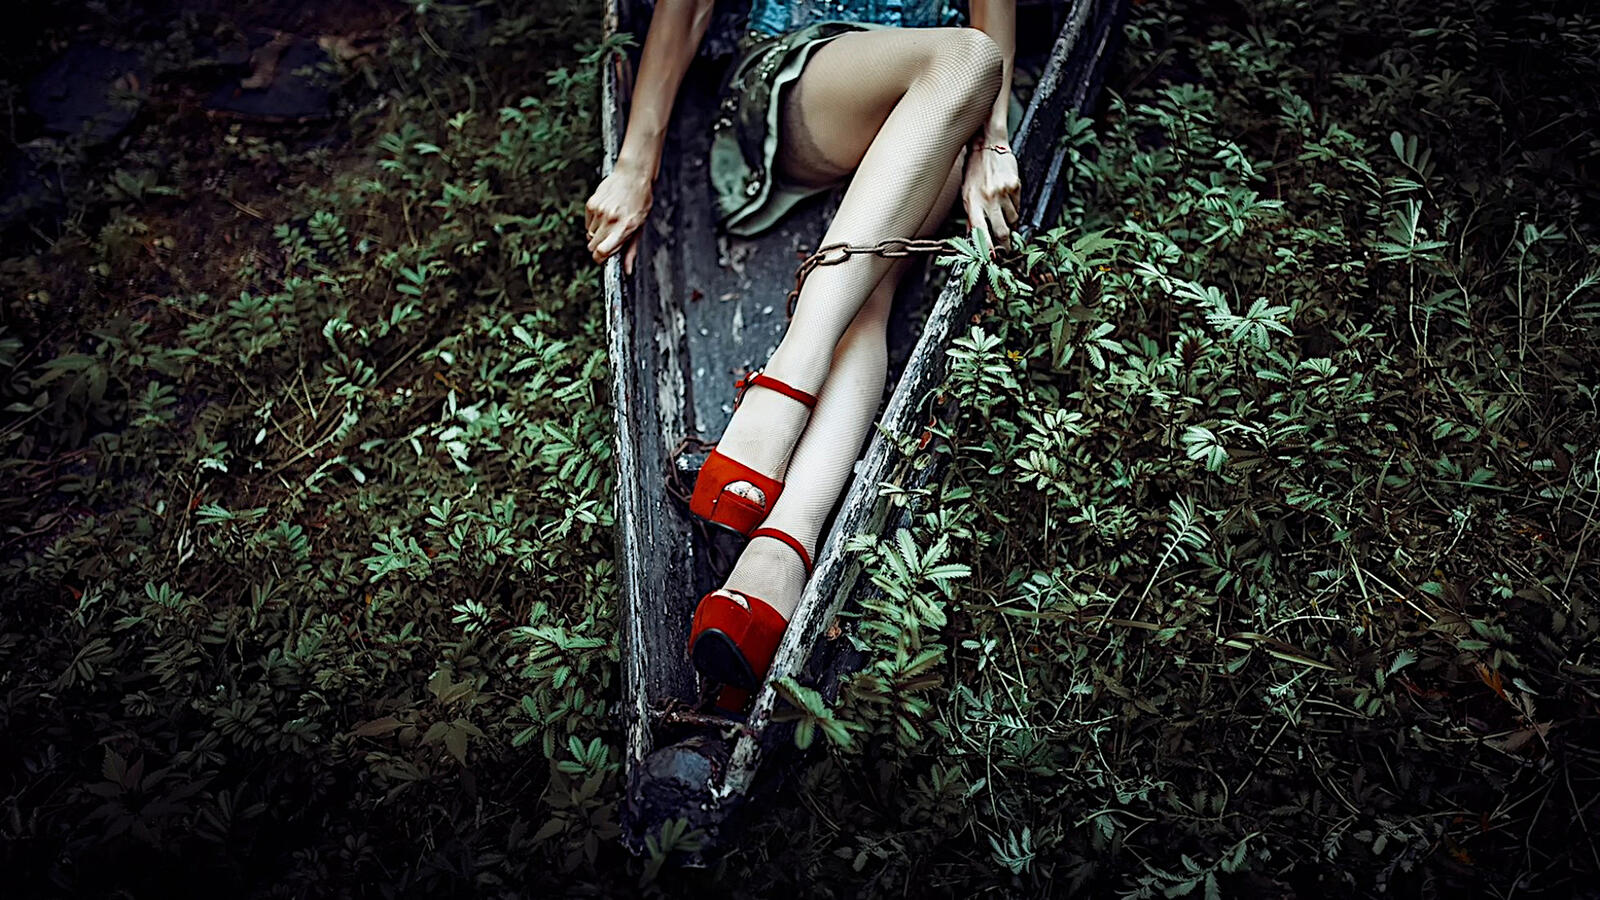 Free photo A girl in red heels in the woods.